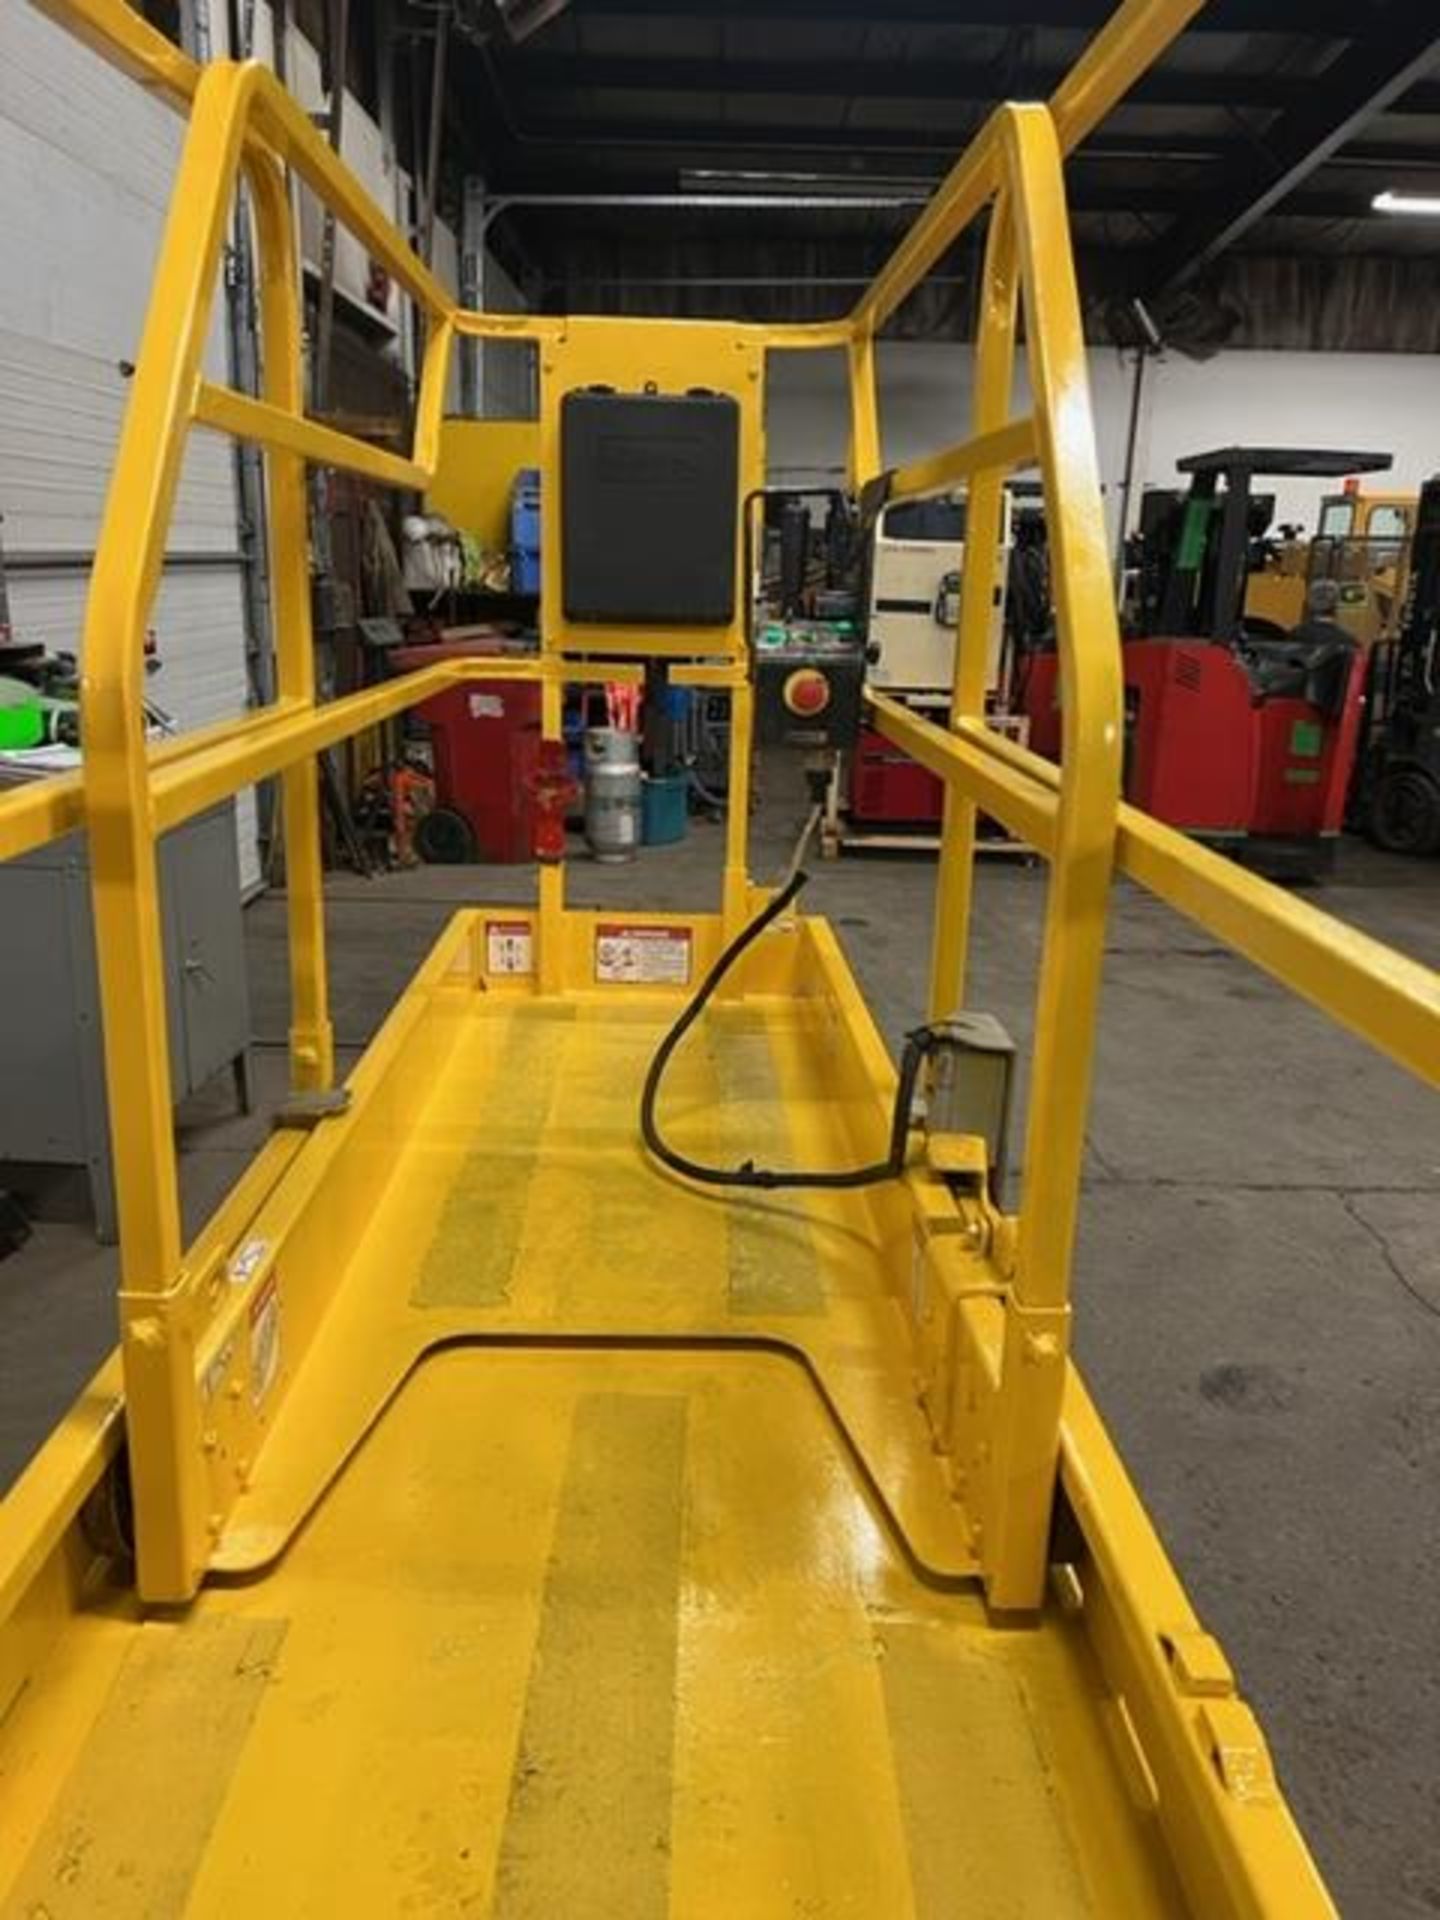 2015 Haulotte 1930E Electric Scissor Lift 500lbs Capacity with 19' platform height 24V unit with - Image 4 of 4